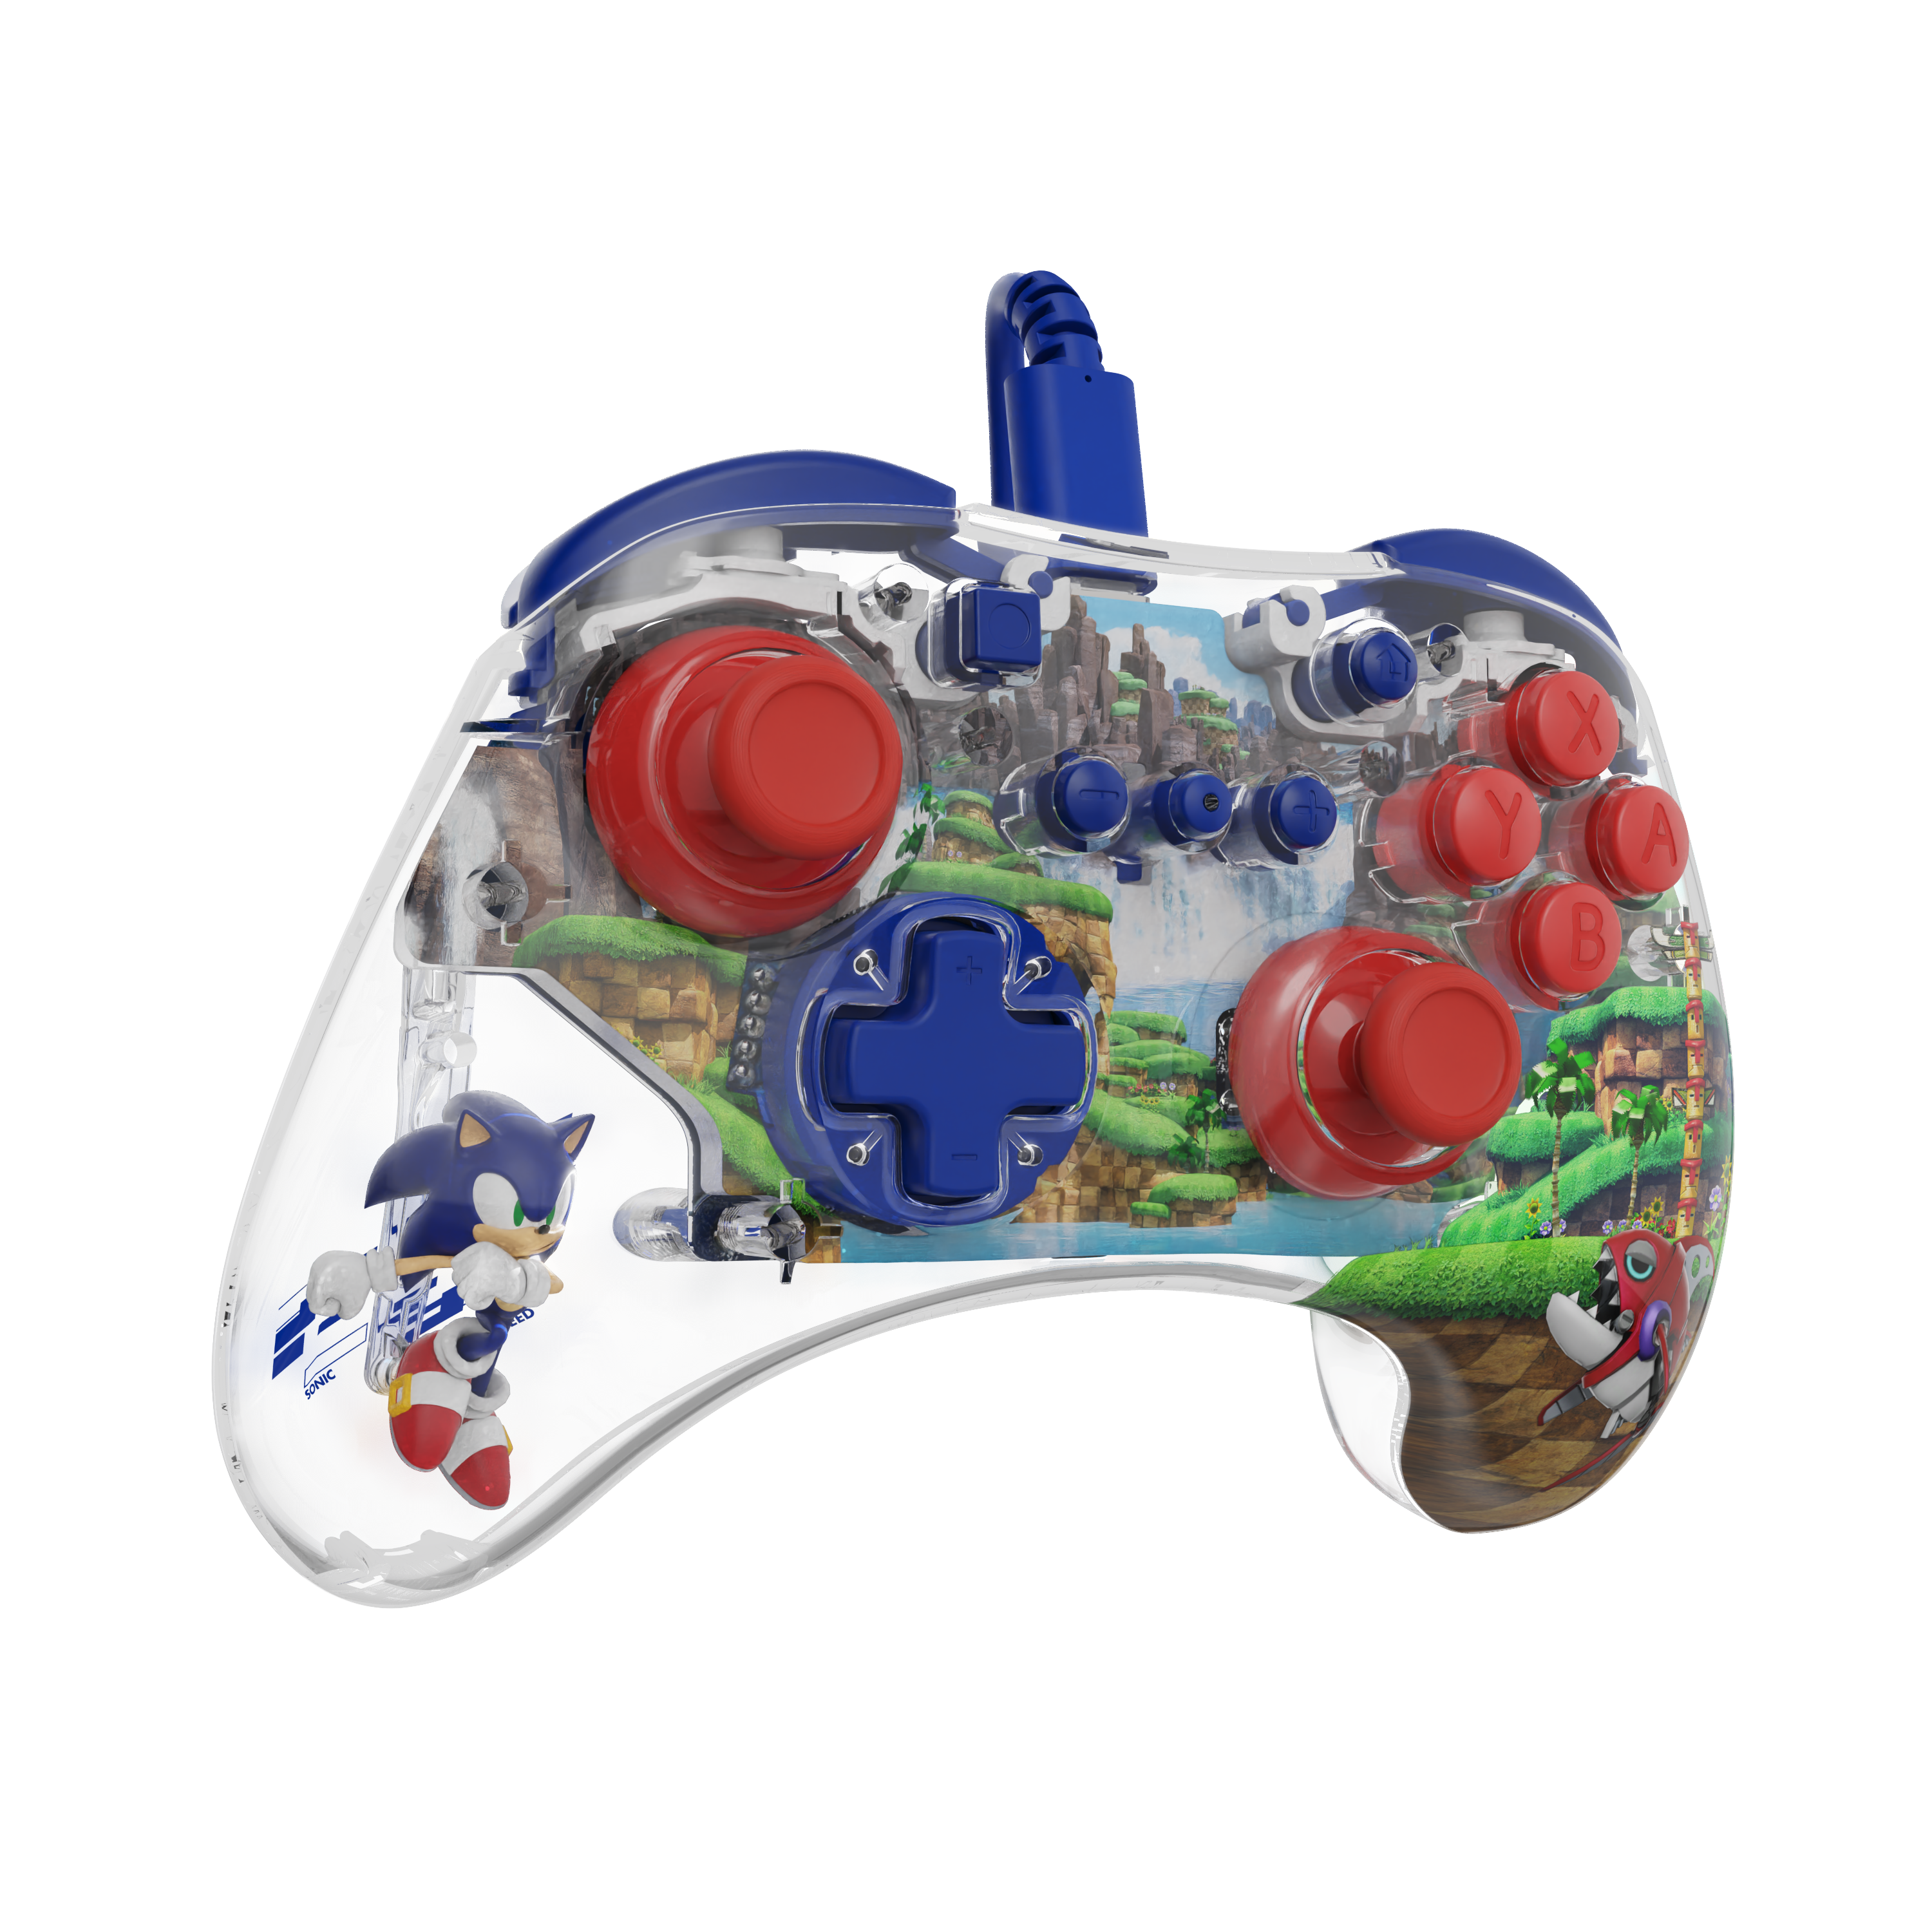 PDP REALMz Sonic wired controller for Nintendo Switch…